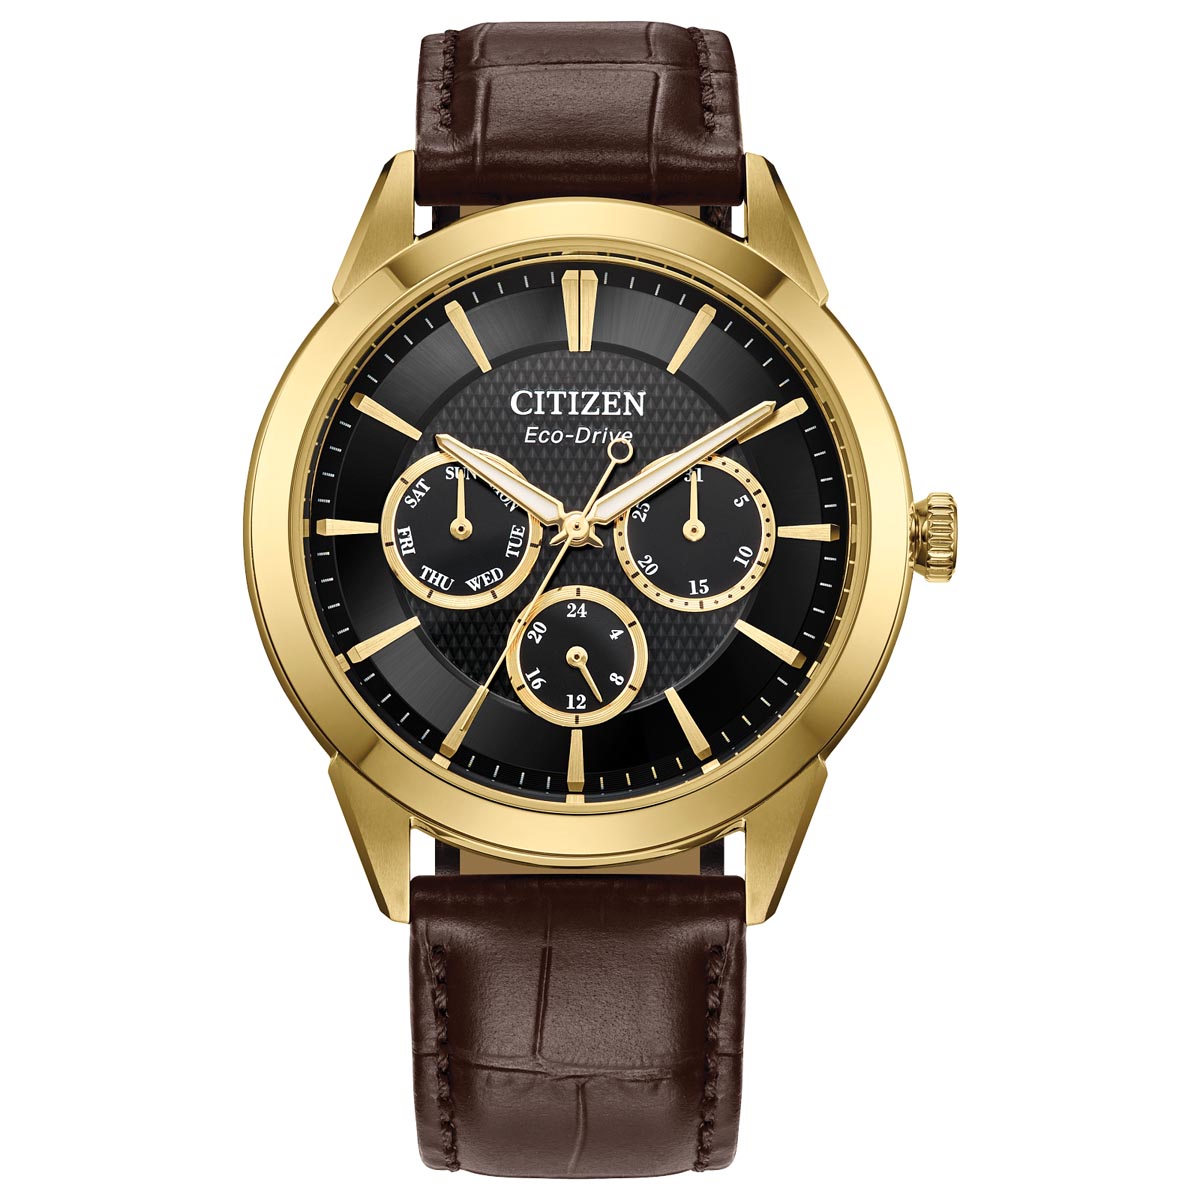 Citizen Classic Mens Watch with Black Dial and Brown Leather Strap (eco drive movement)